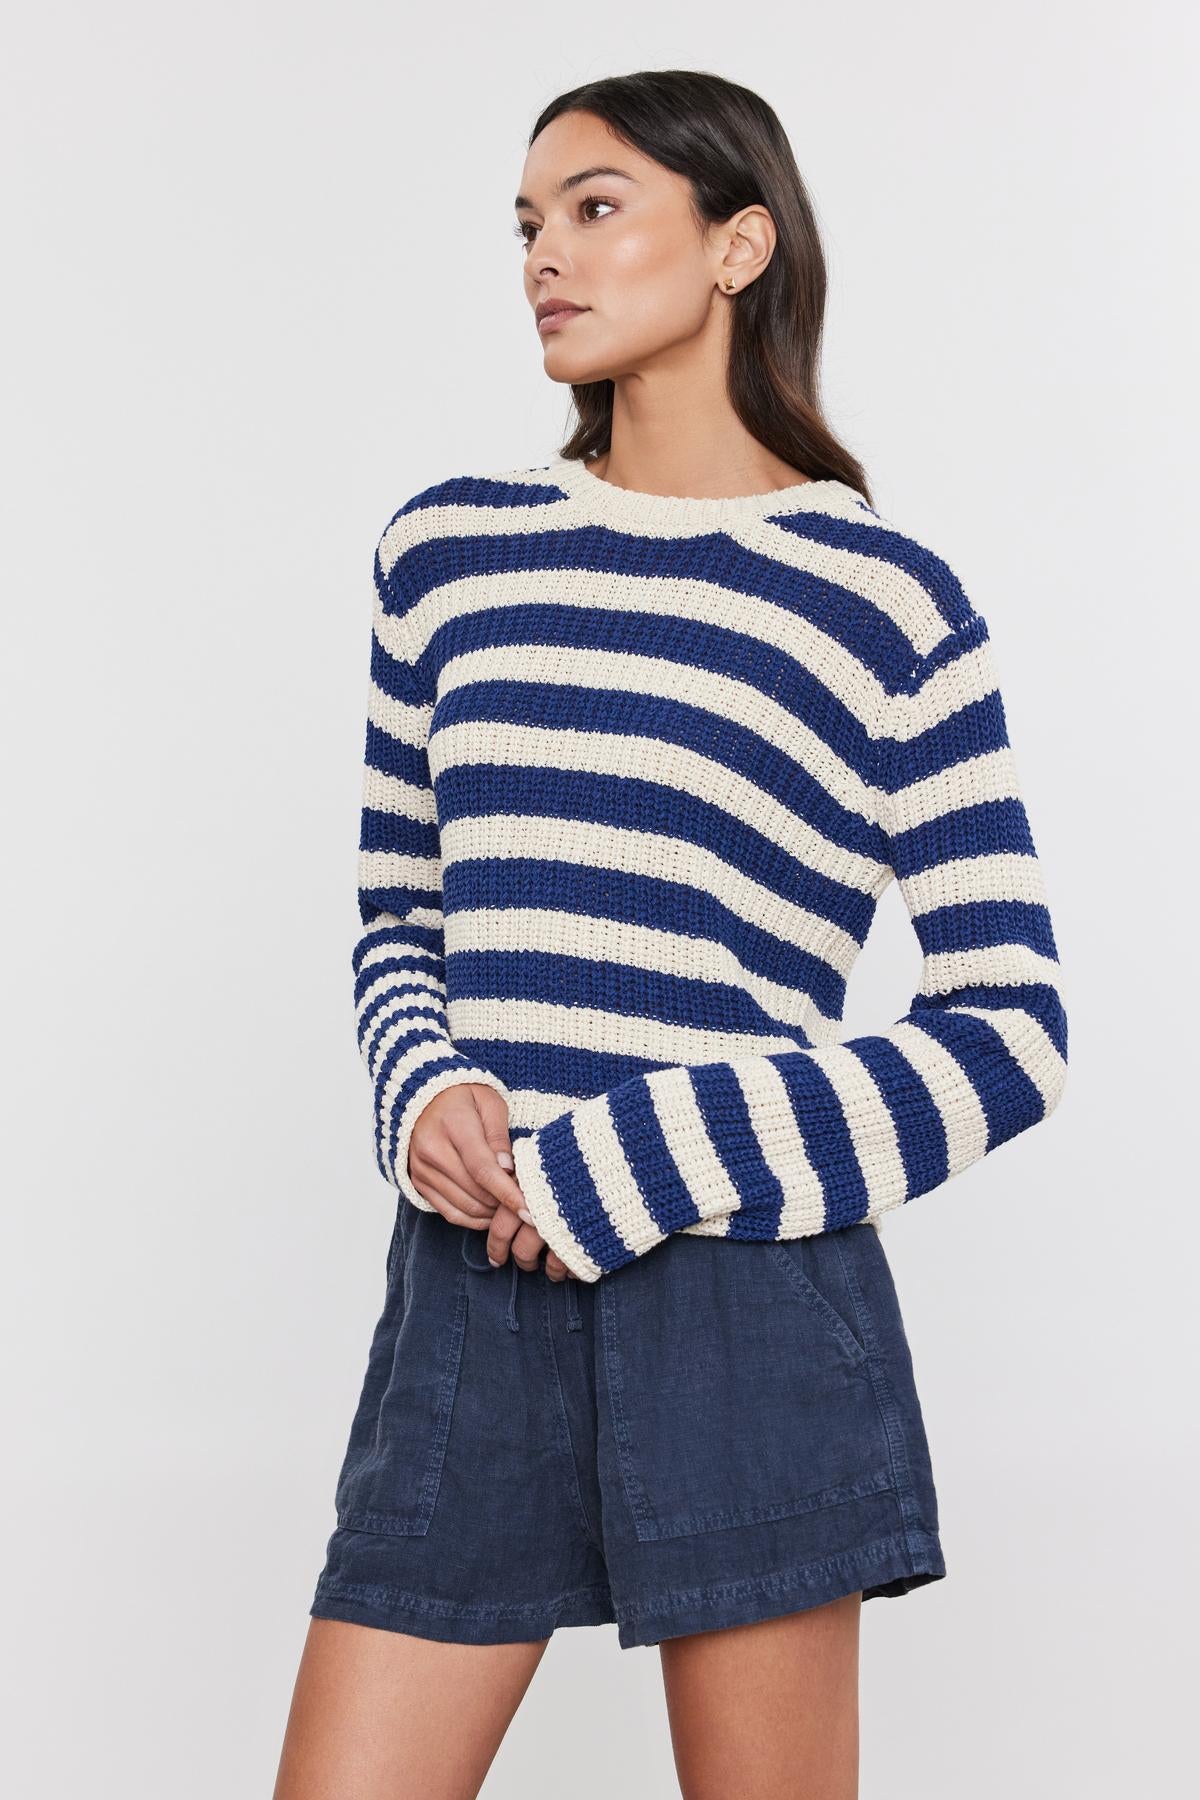   A woman in a Velvet by Graham & Spencer MAXINE SWEATER and denim skirt poses with her hand on her hip, looking to the side on a white background. 